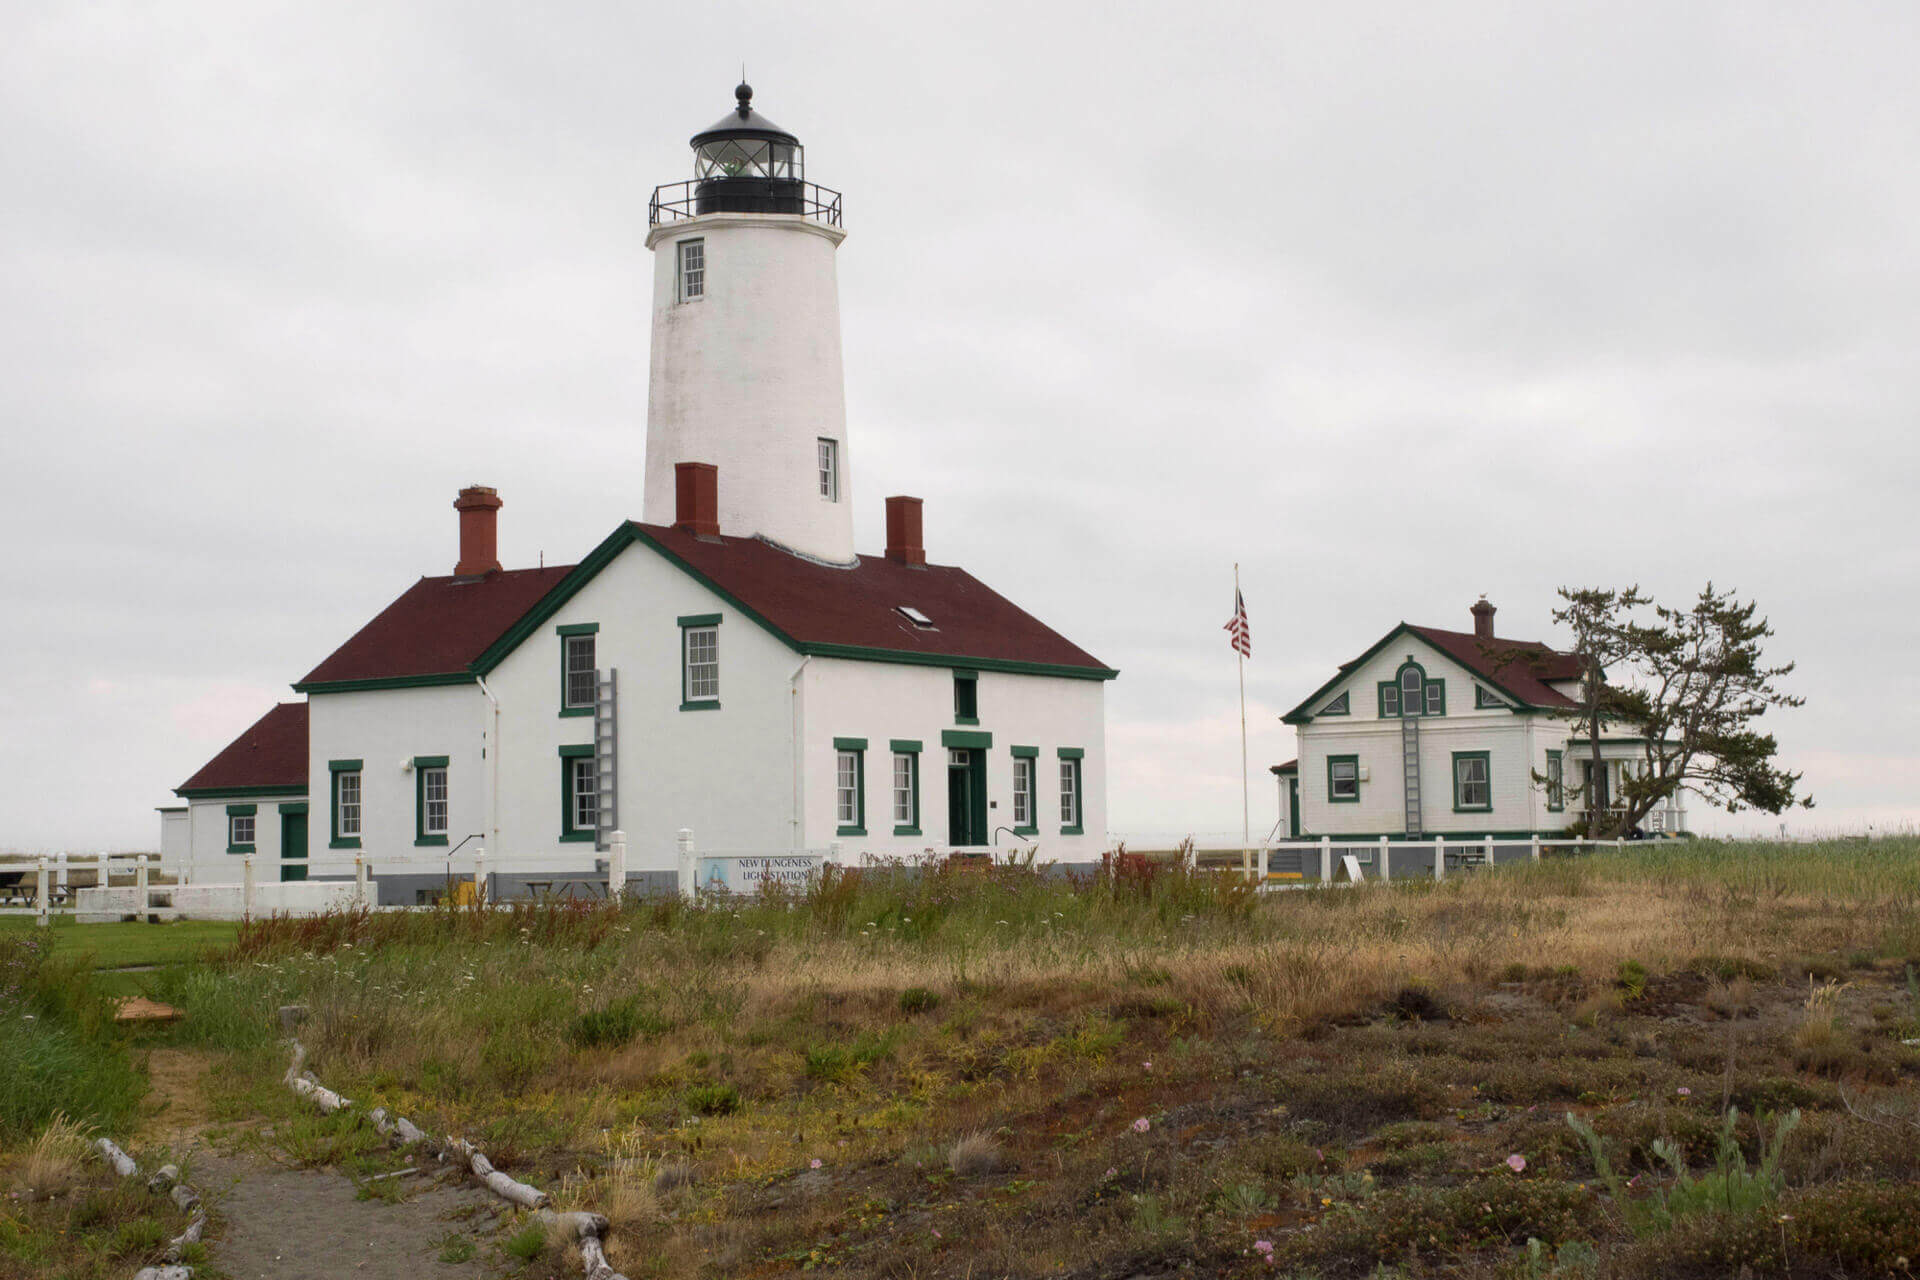 New Dungeness Lighthouse in Washington and adjacent buildings. White exterior with green trim and red roofing.